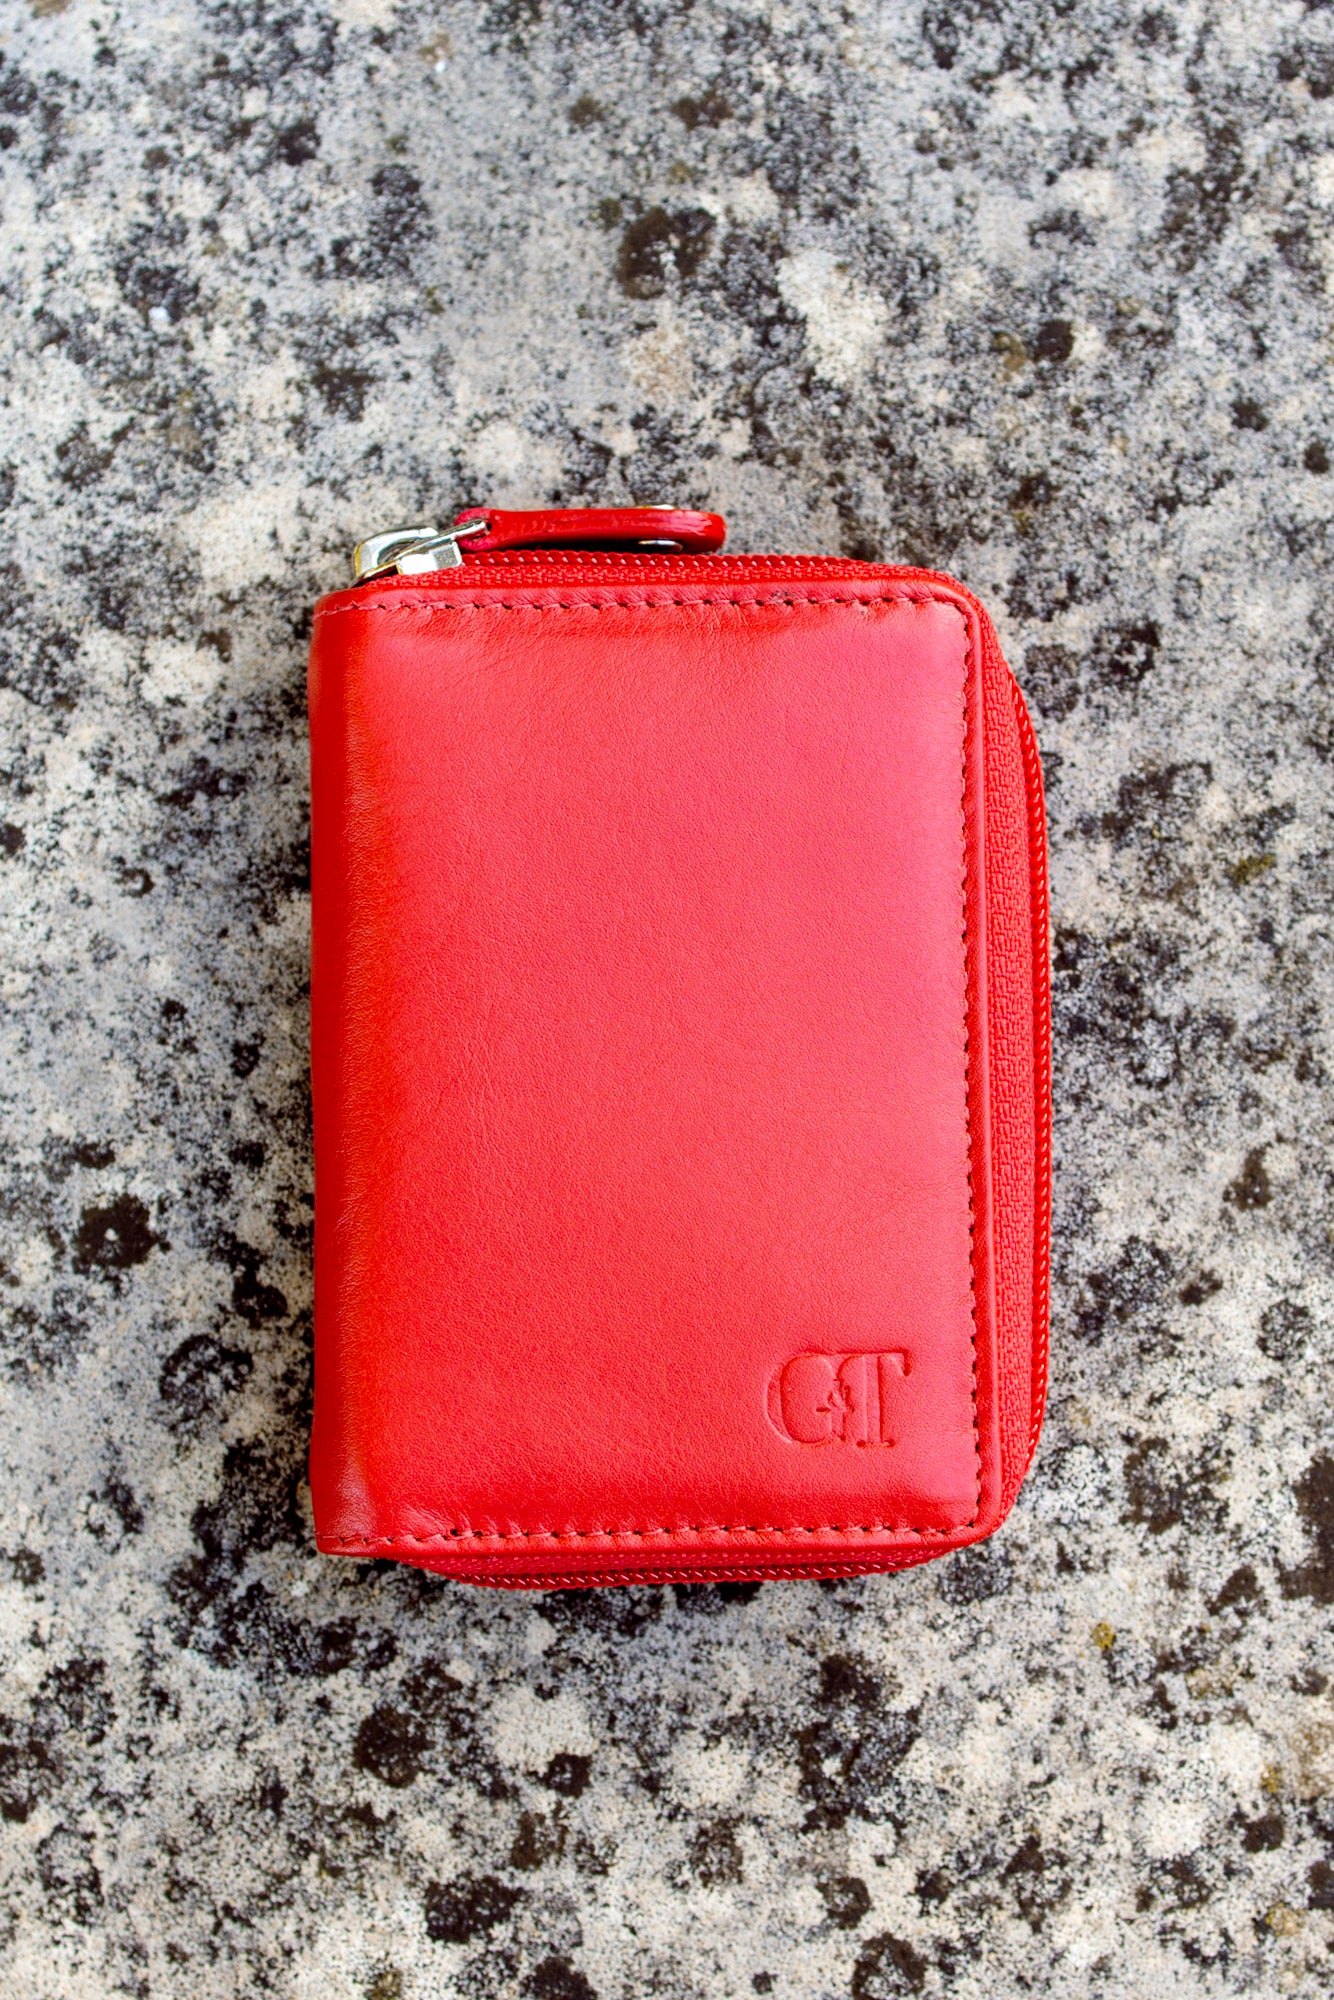 GT-CW1: G&T Full-grain Leather Concertina Card Holder (RFID Protected)